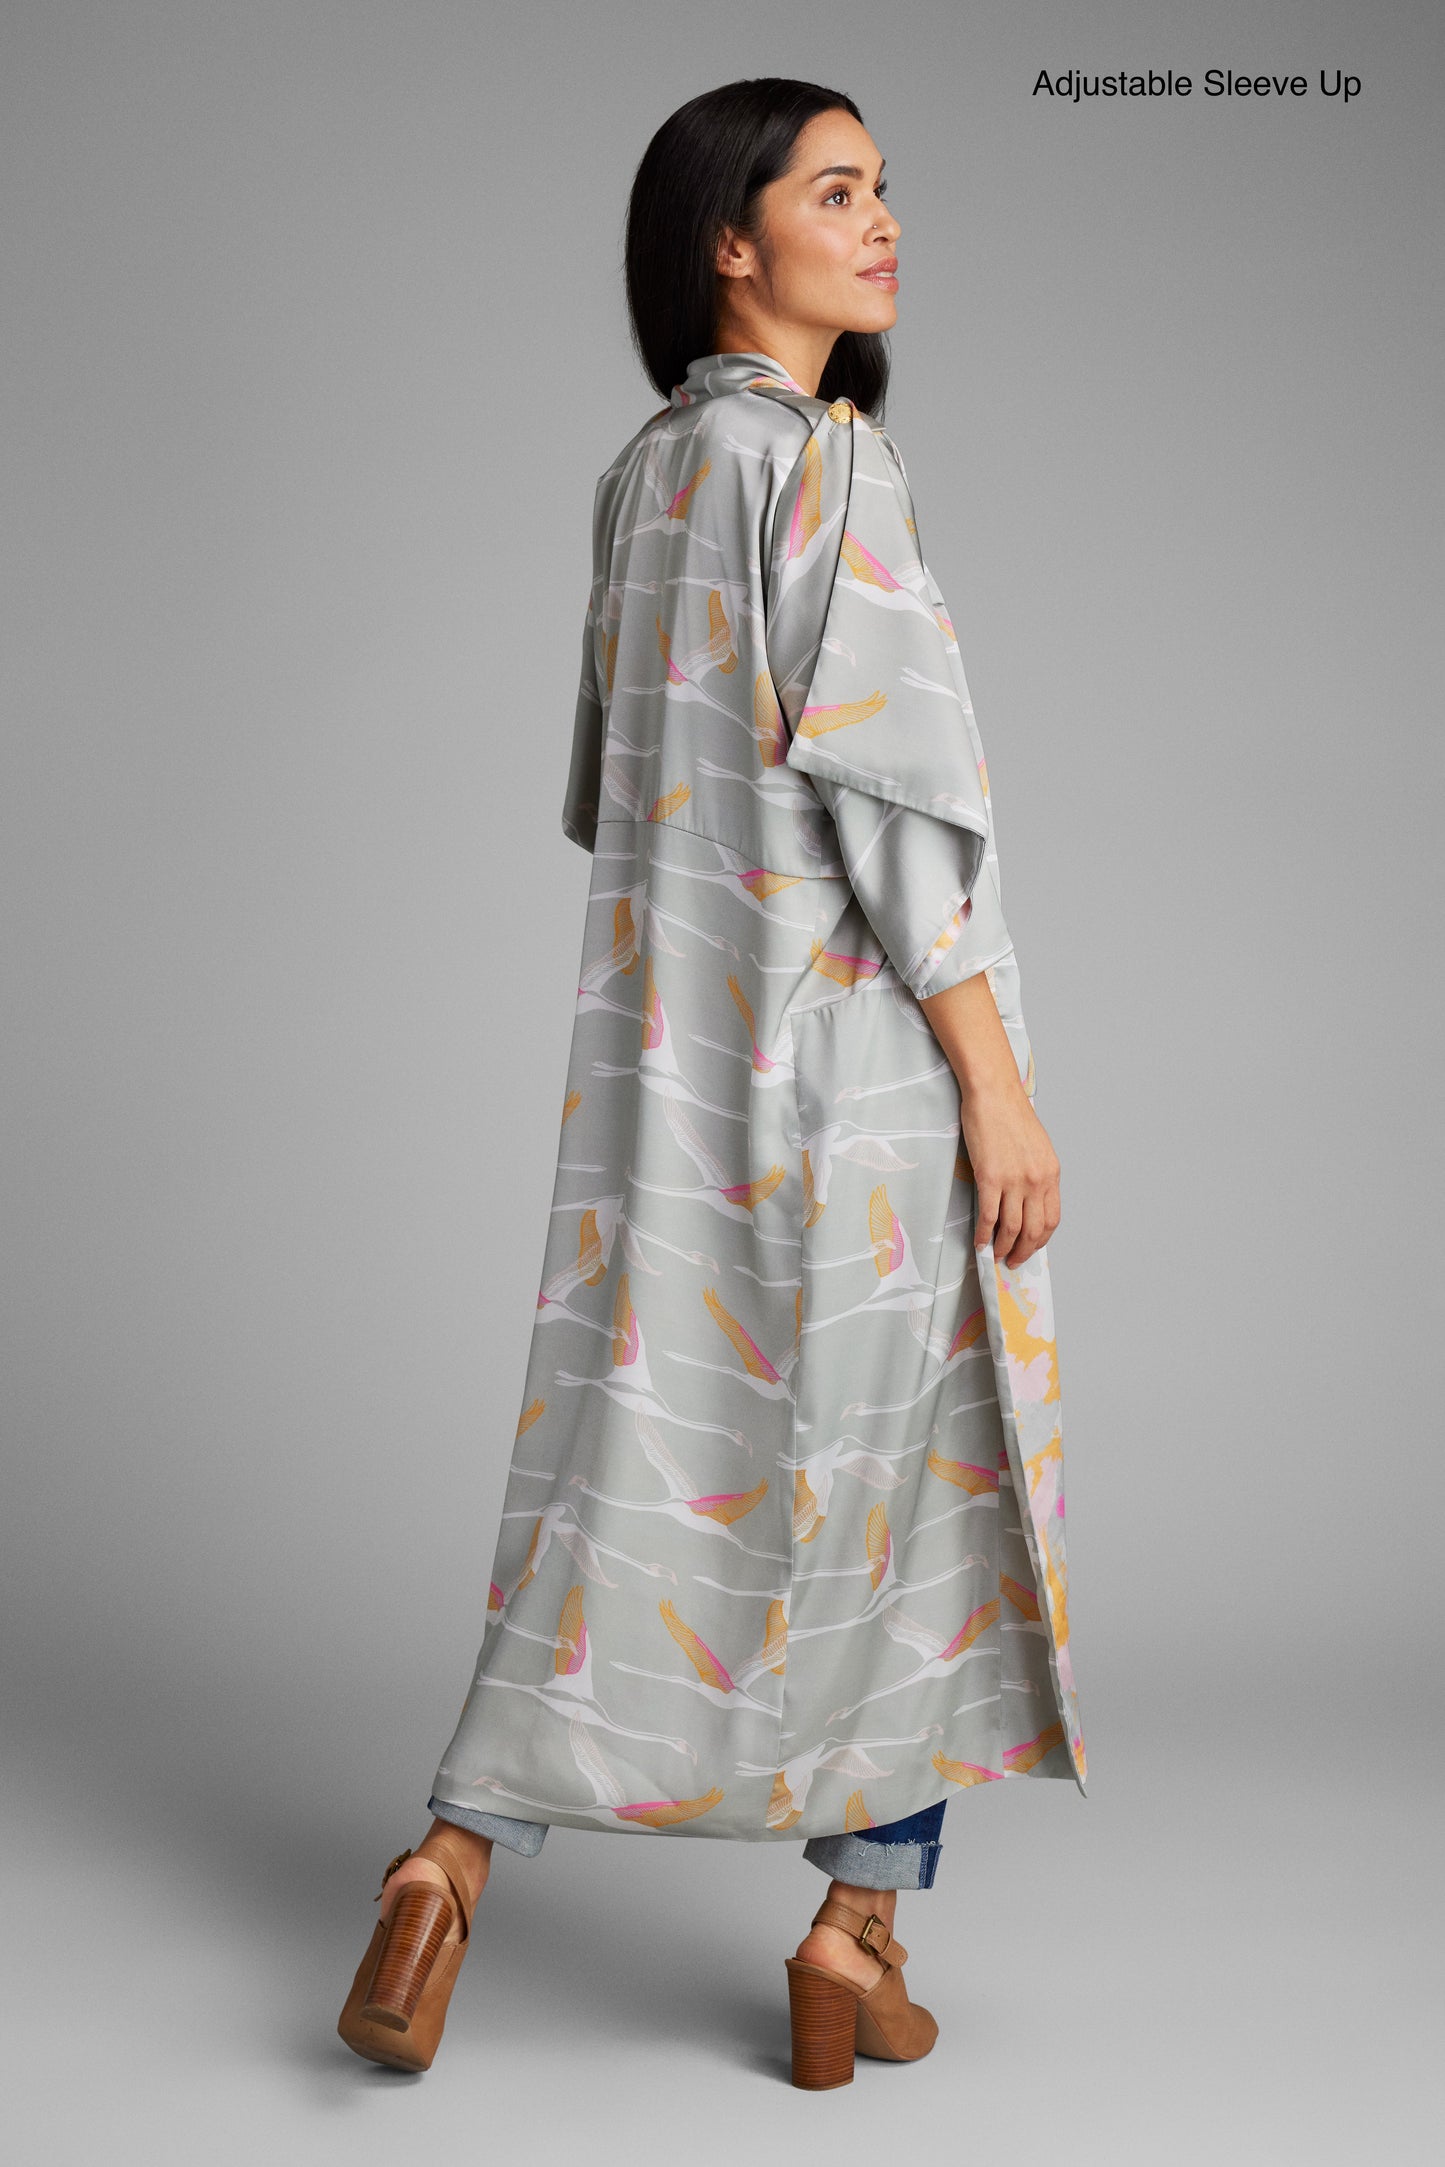 Back profile view of woman wearing a grey pink and gold colored crane print kimono duster made from recycled materials